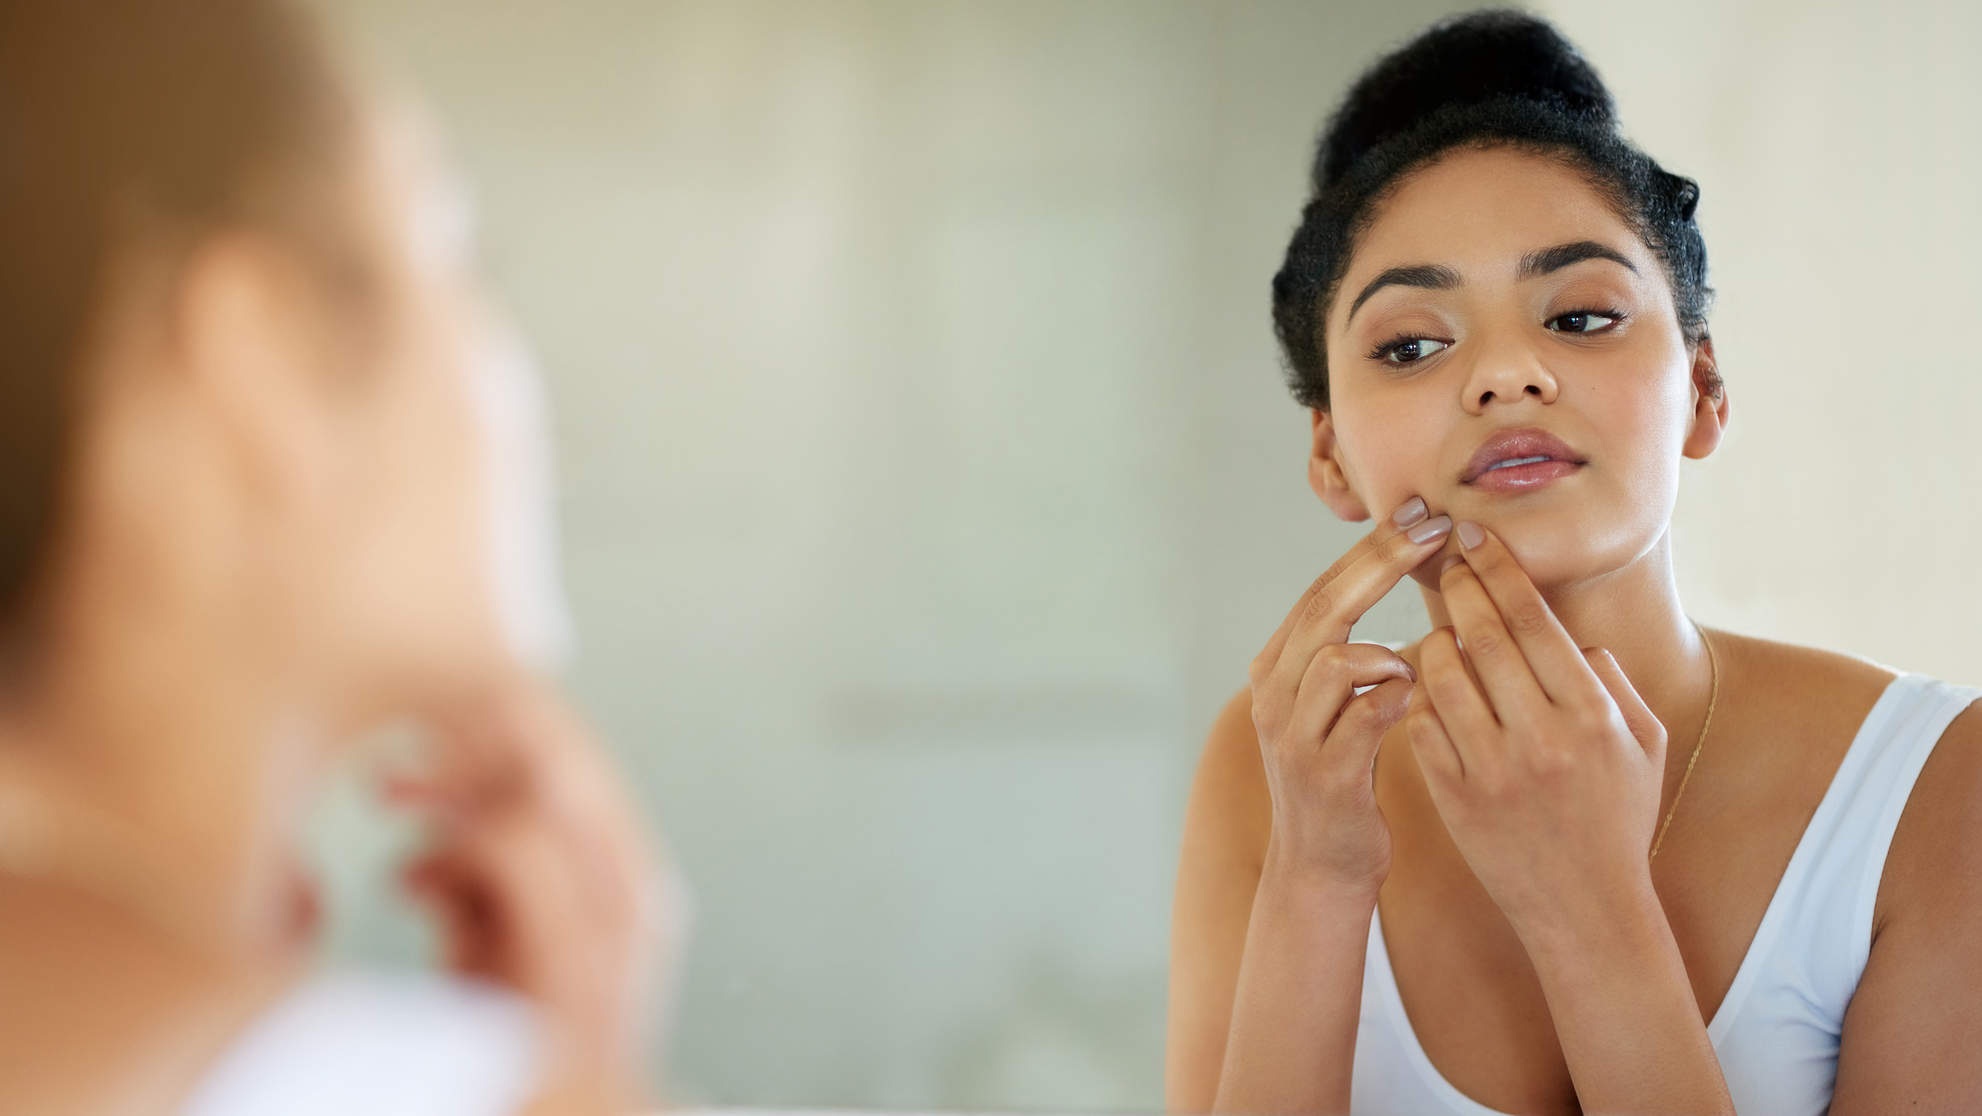 Taking proper care of oily skin – Avoid outbursts and stay beautiful!